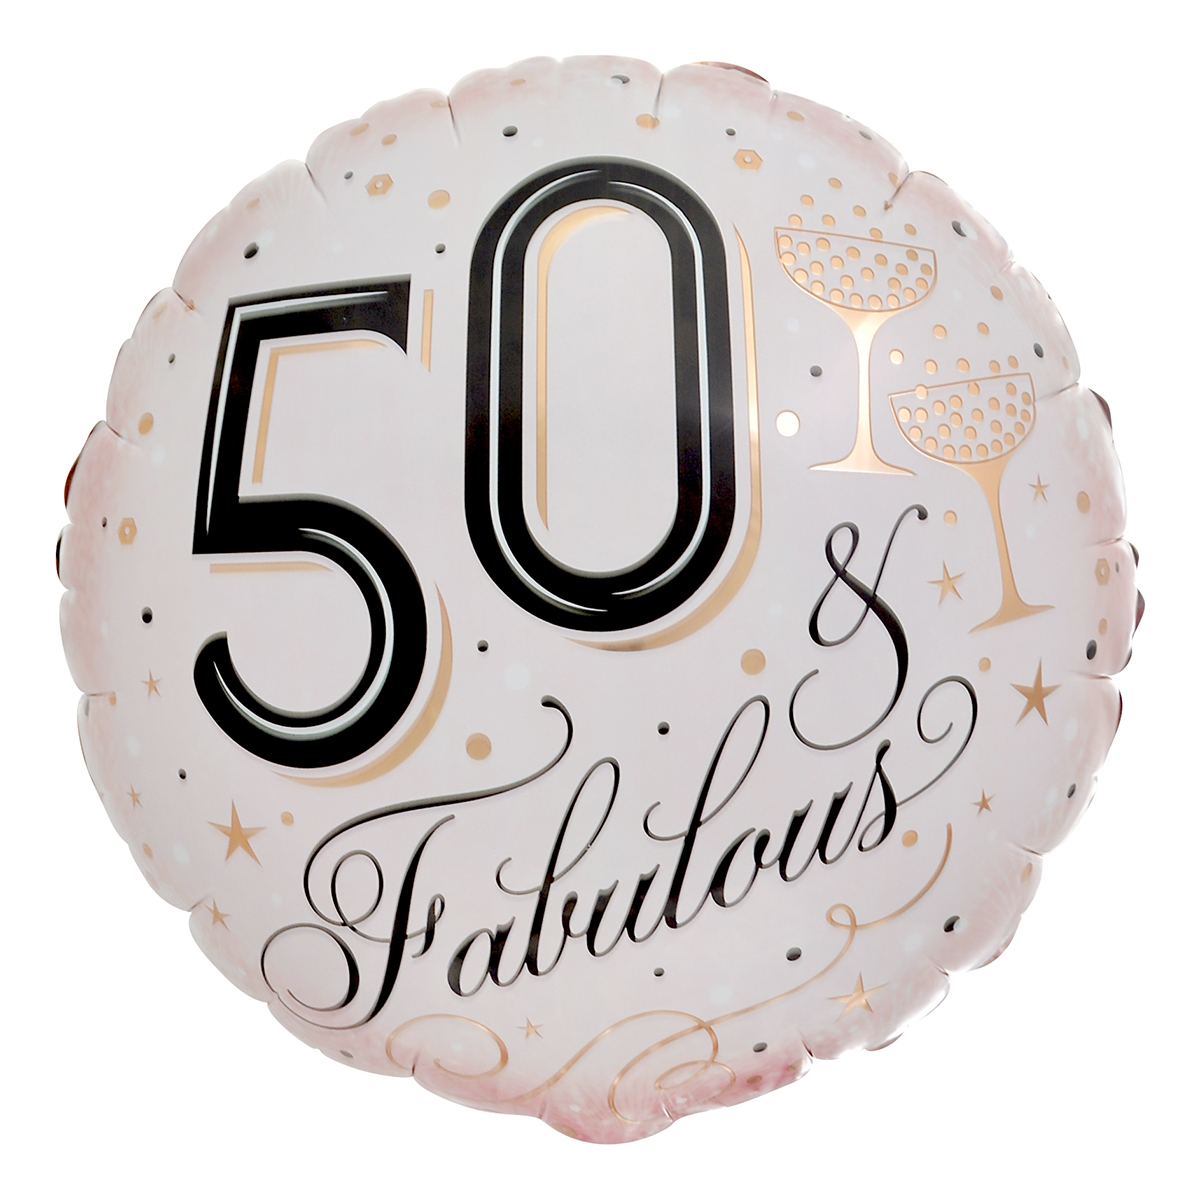 Buy Fabulous 50th Birthday 18-Inch Foil Helium Balloon for GBP 2.99